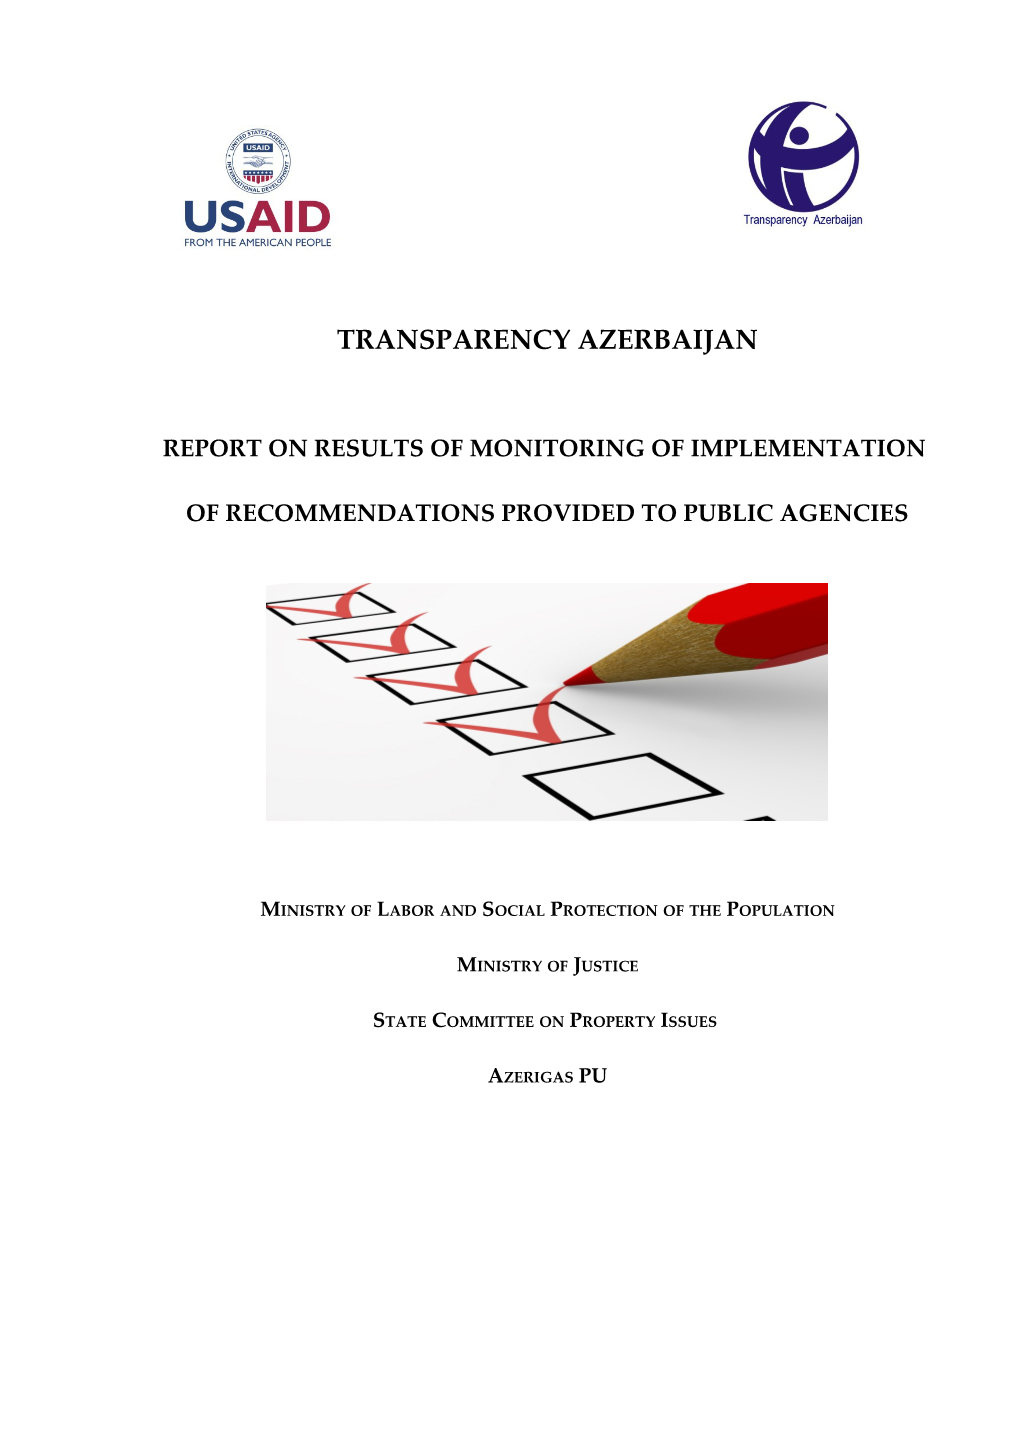 Report on Results of MONITORING of Implementation